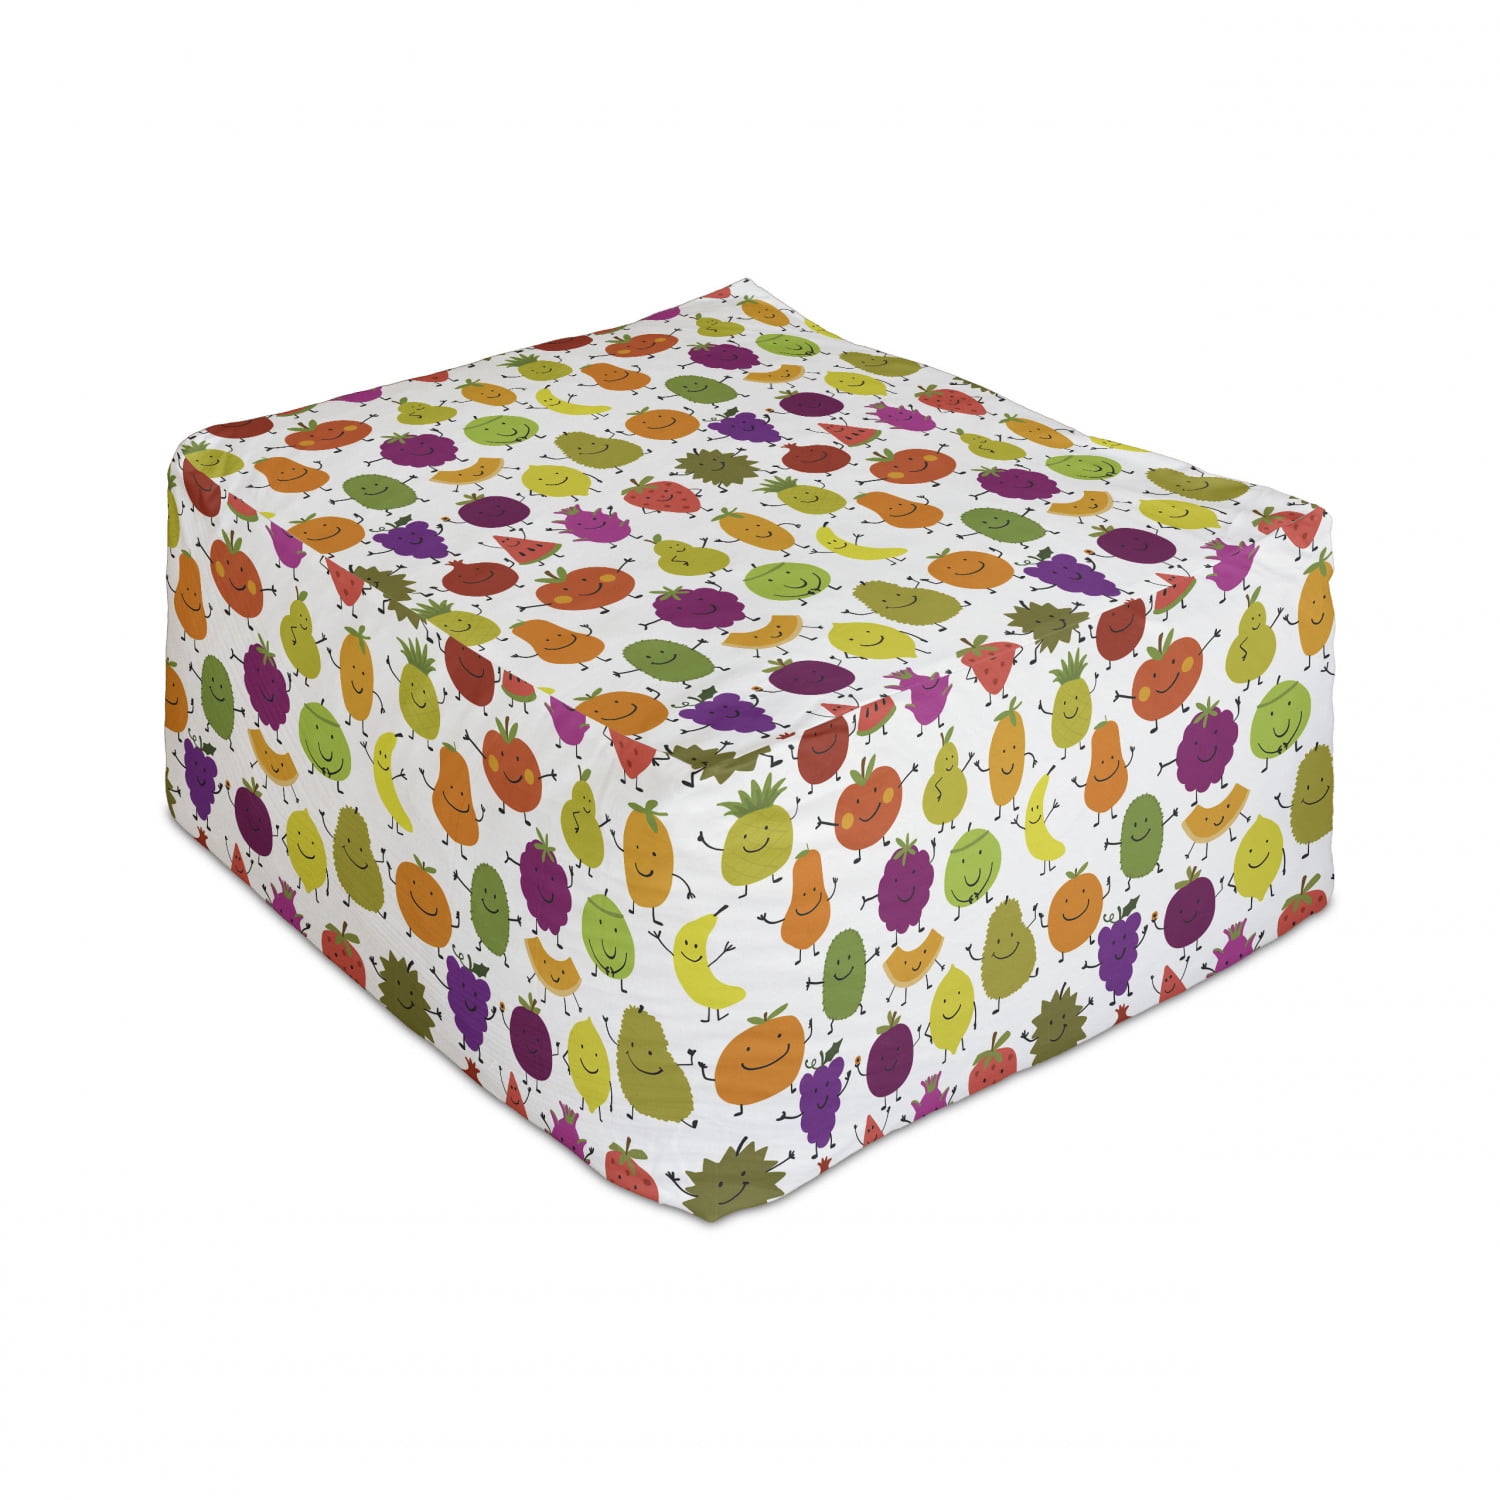 Ambesonne Colorful Rectangle Pouf 25 Under Desk Foot Stool for Living Room Office Ottoman with Cover Quirky Shapes Geometrical Theme with Abstract Illustration in Grunge Style Multicolor